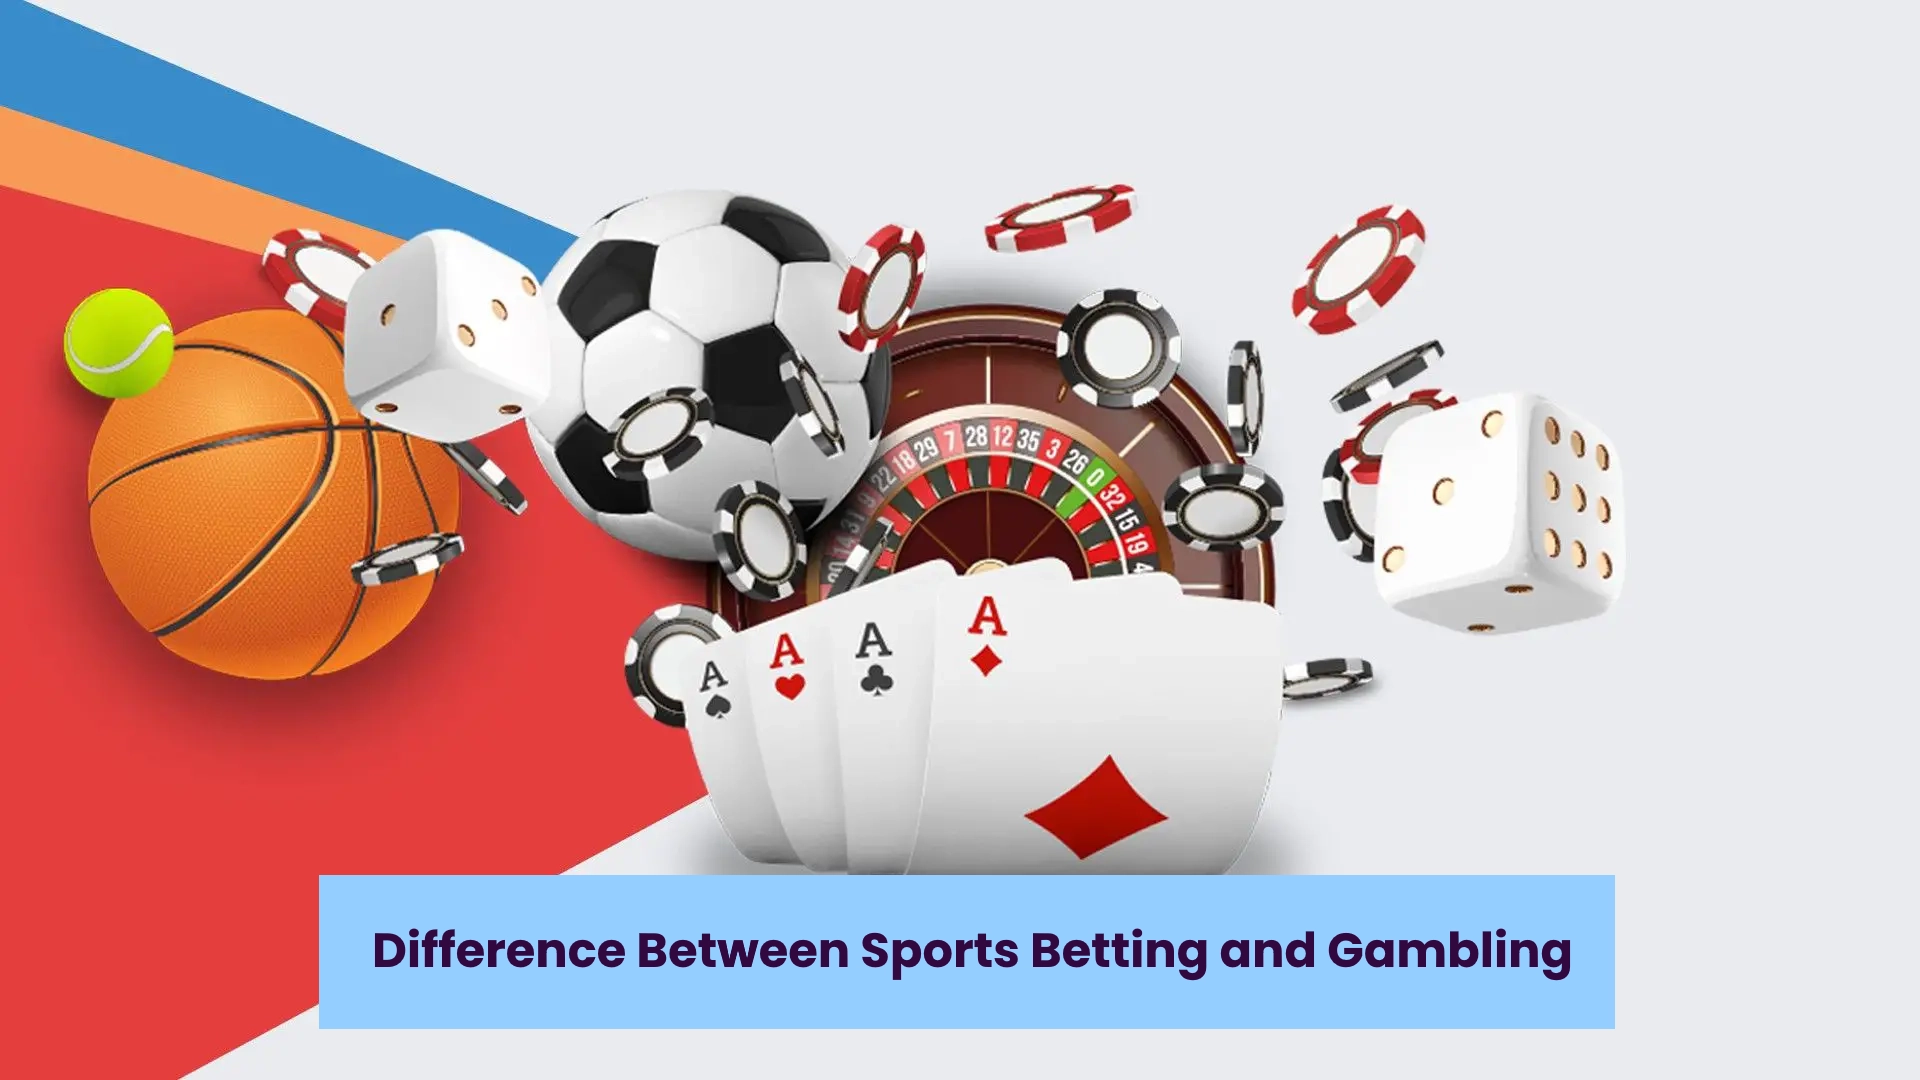 Difference Between Sports Betting and Gambling